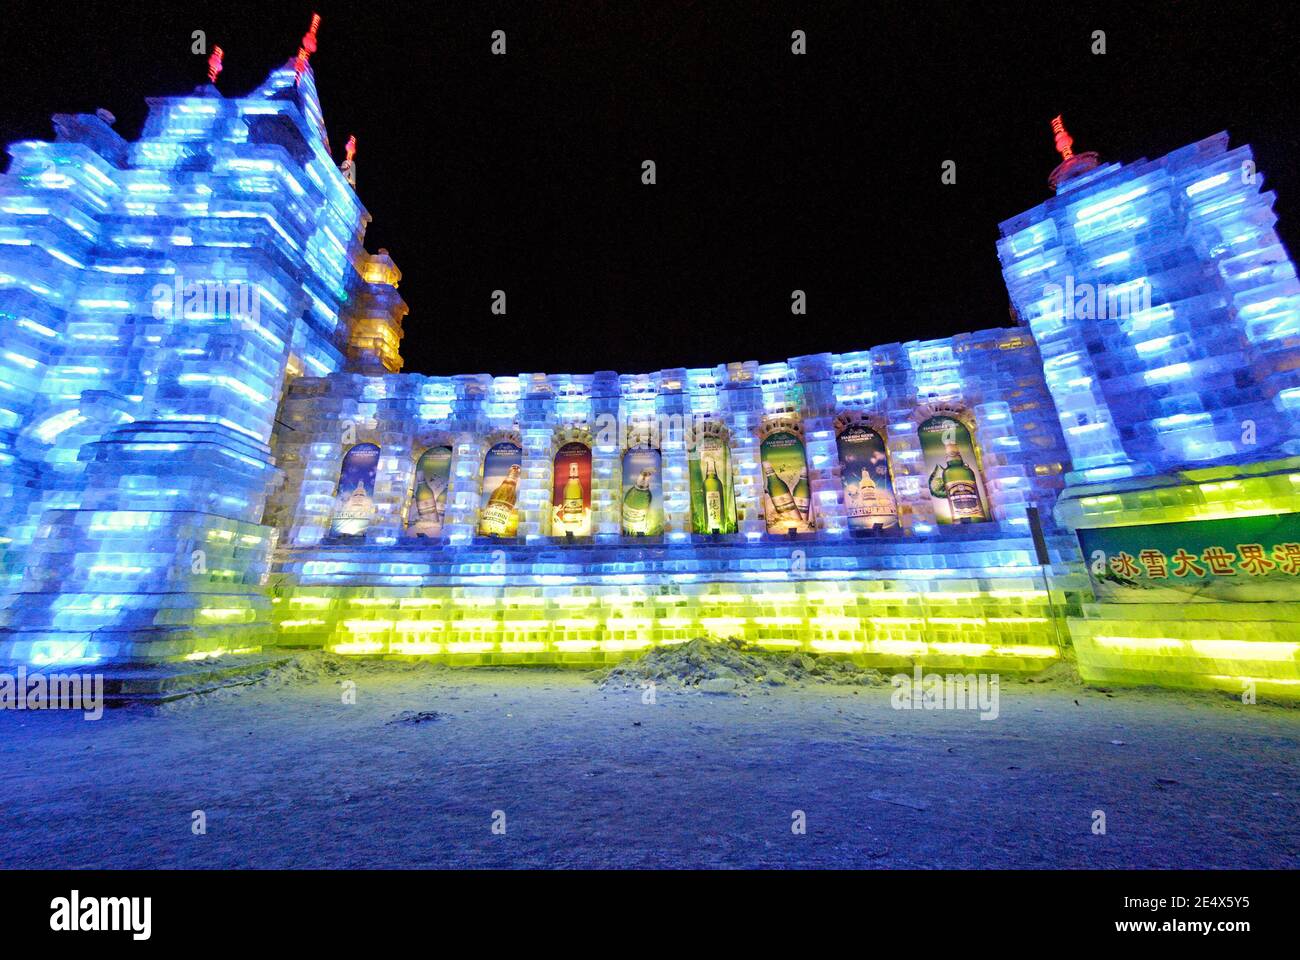 HARBIN,CHINA-JANUARY 30, 2010: lluminated fortification wall carved in ice with advertisement for beer at Harbin Ice & Snow World Festival Stock Photo